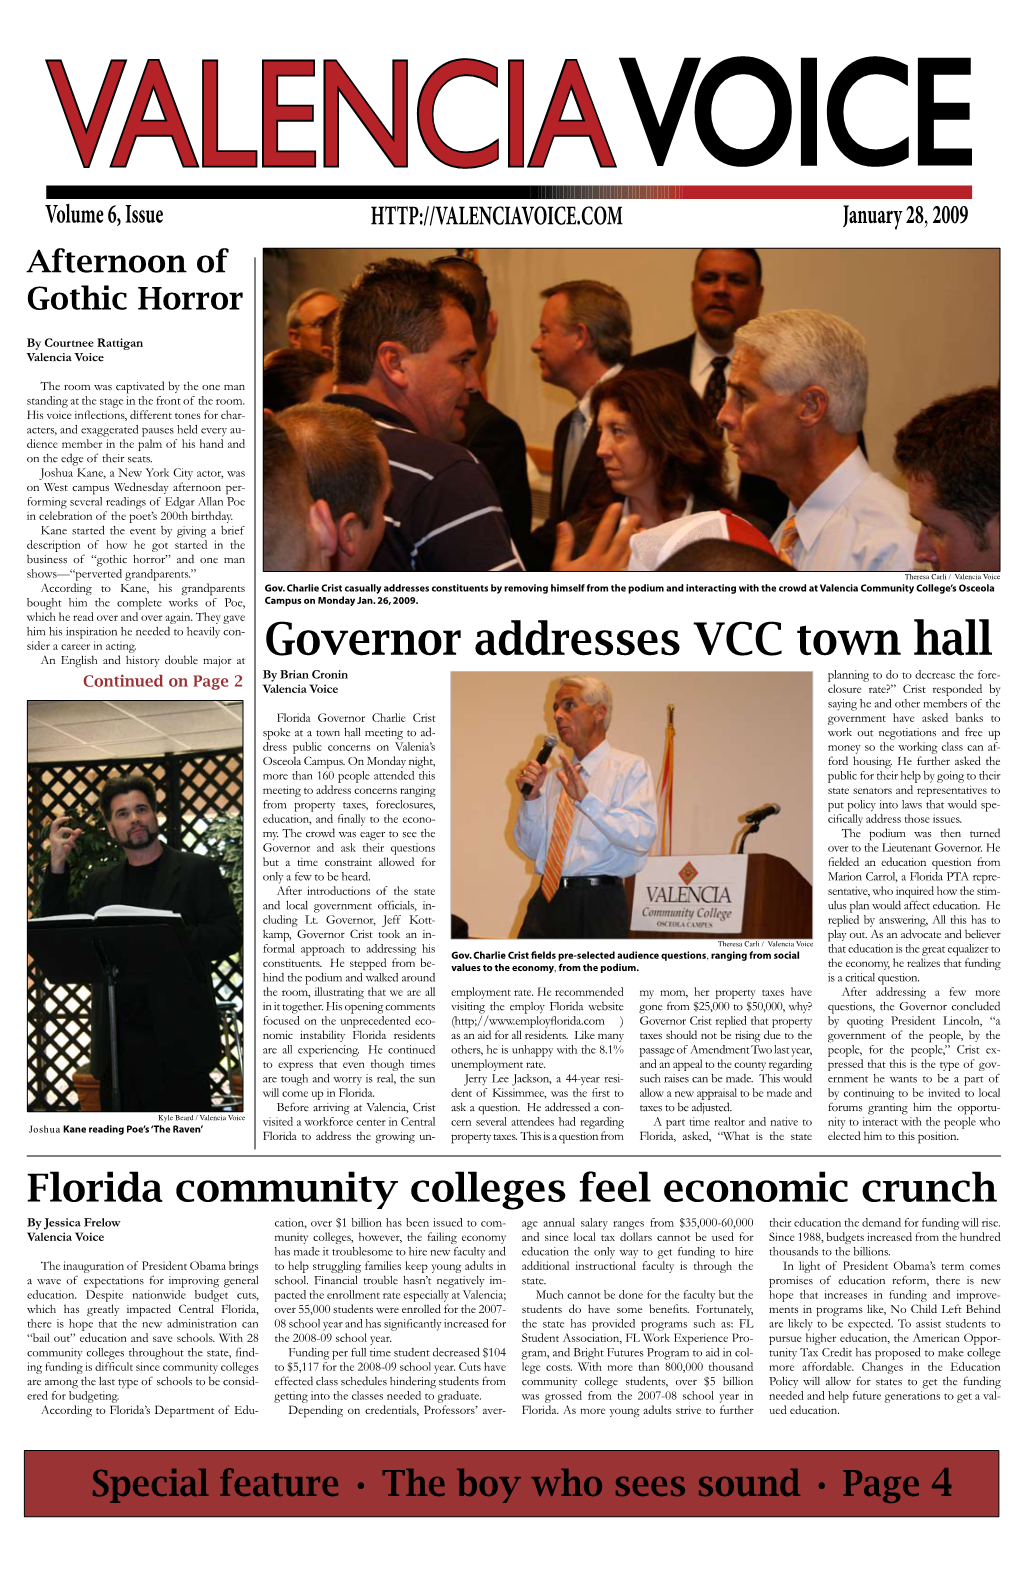 Governor Addresses VCC Town Hall